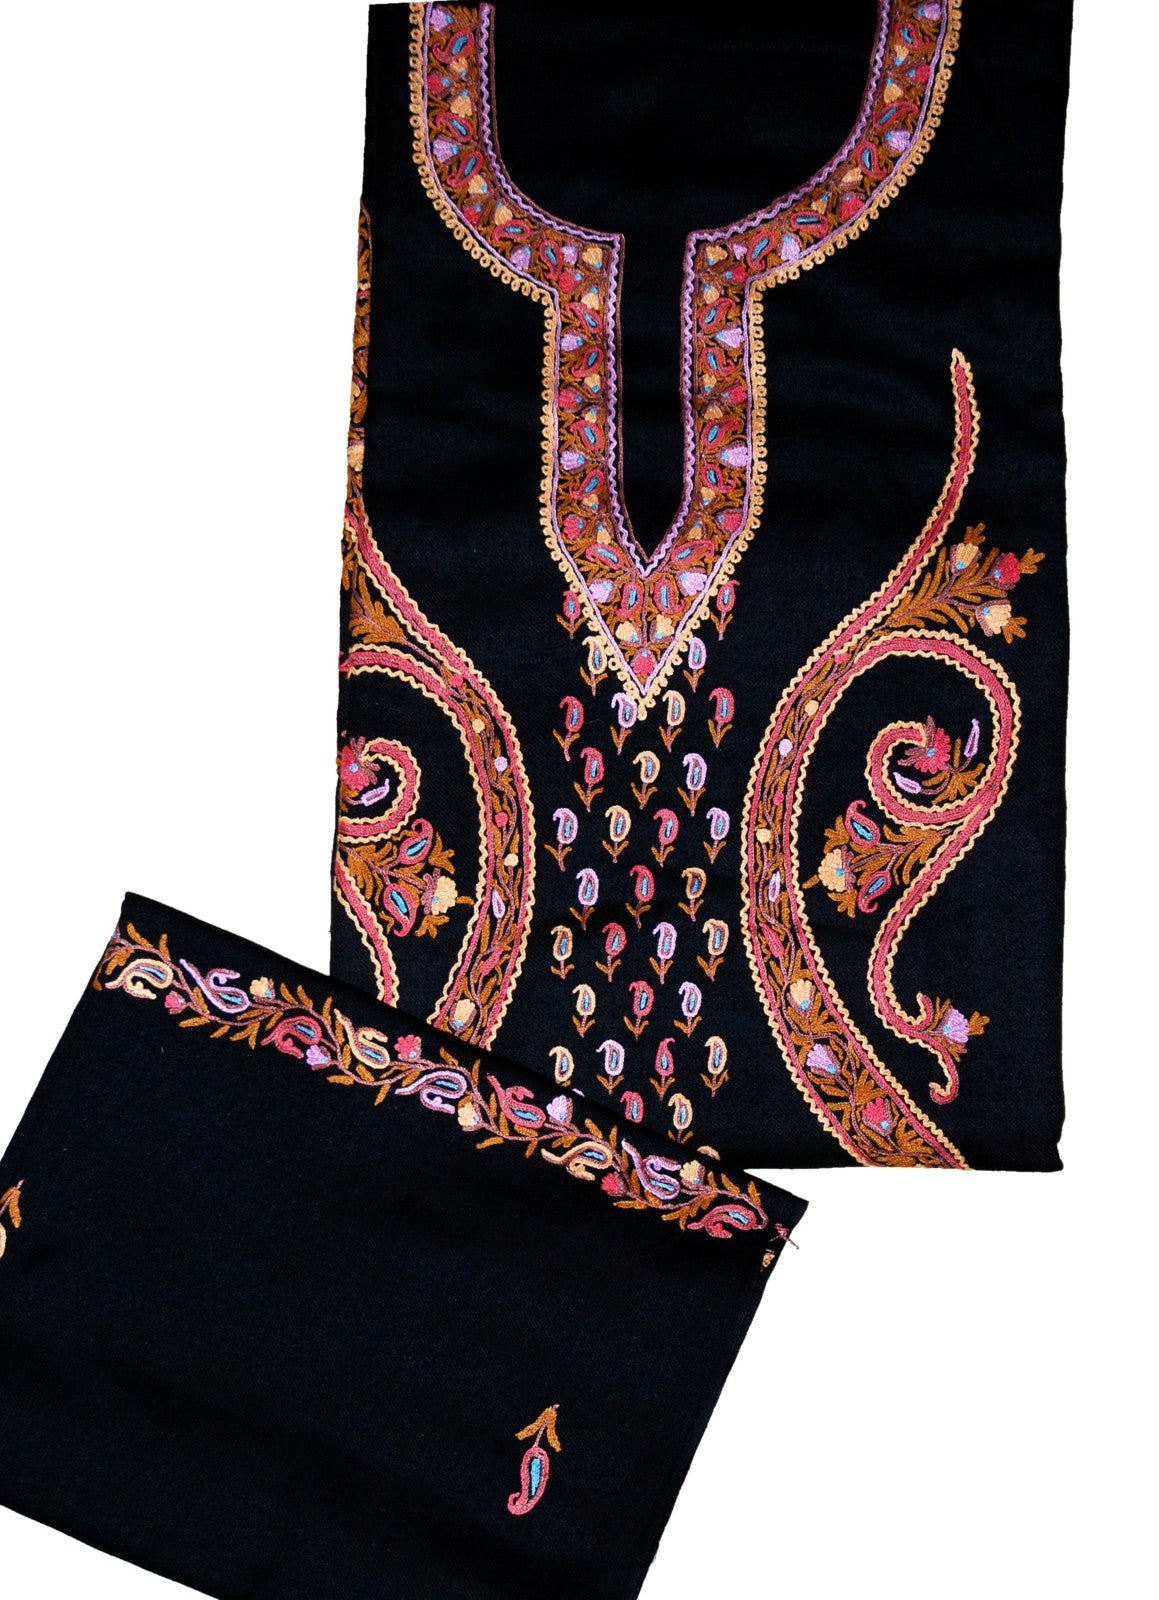 Woolen Salwar Kameez Suit Unstitched Fabric and Shawl Black, Multicolor Embroidery #FS-422